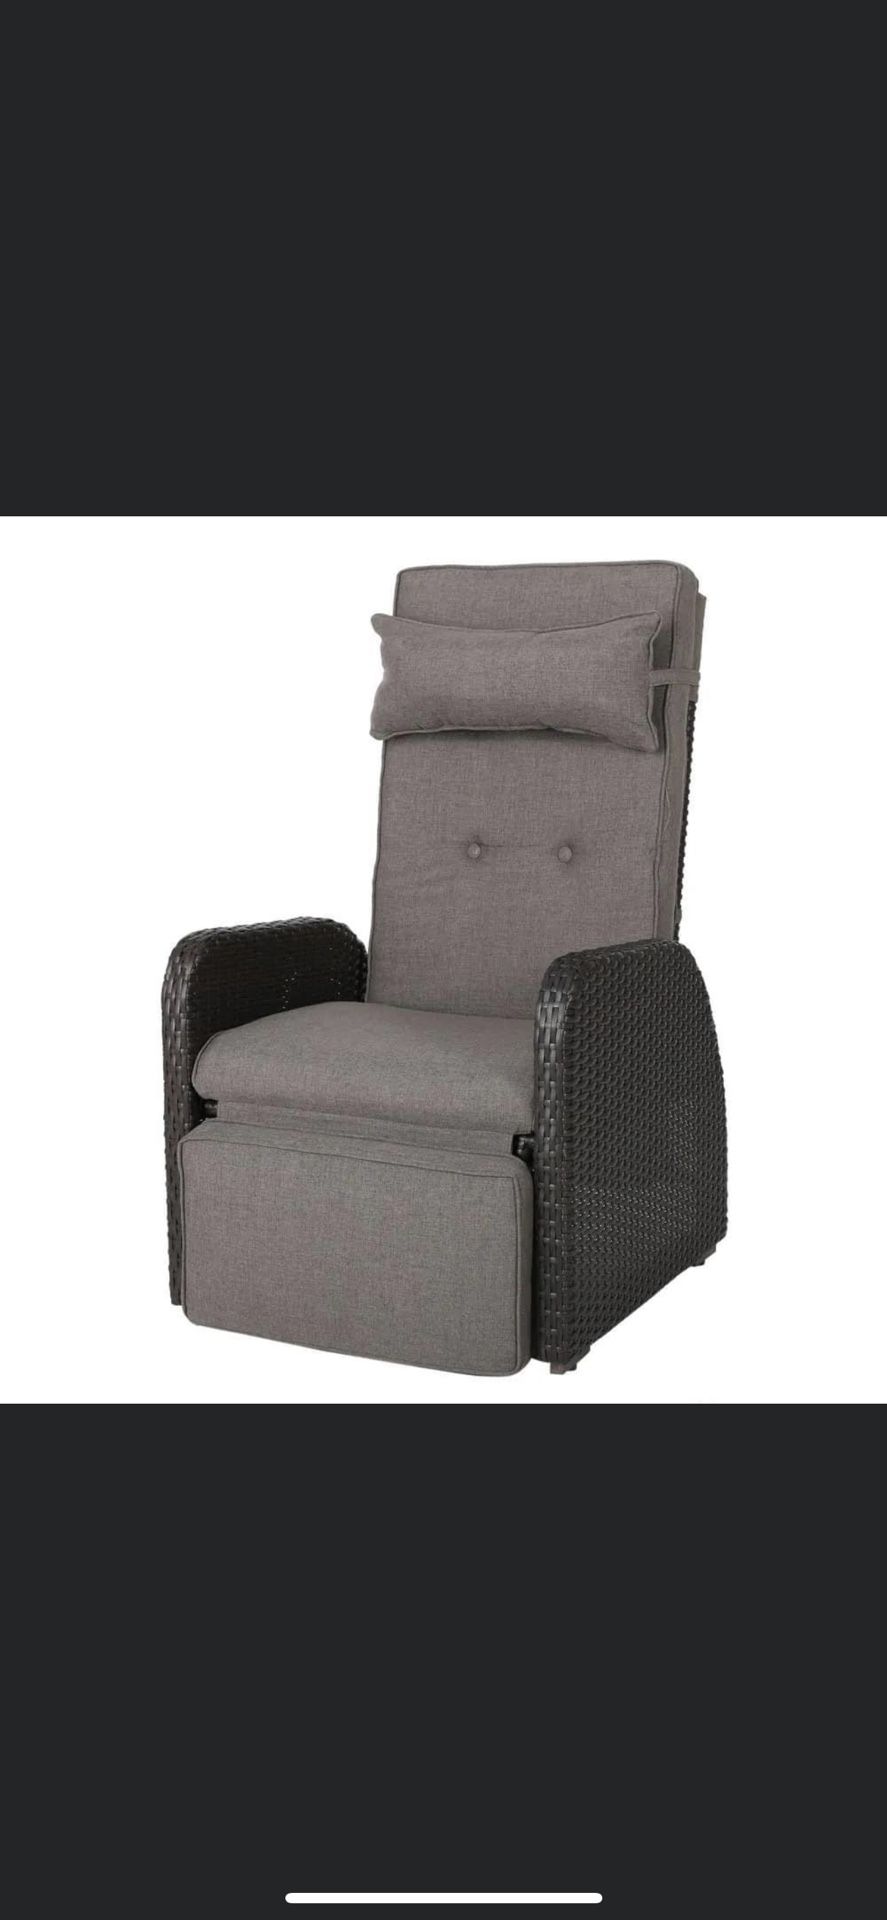 Noble House Ostia Brown Plastic Outdoor Recliner with Gray Cushion Price-190$ Condition-new-ready to pickup